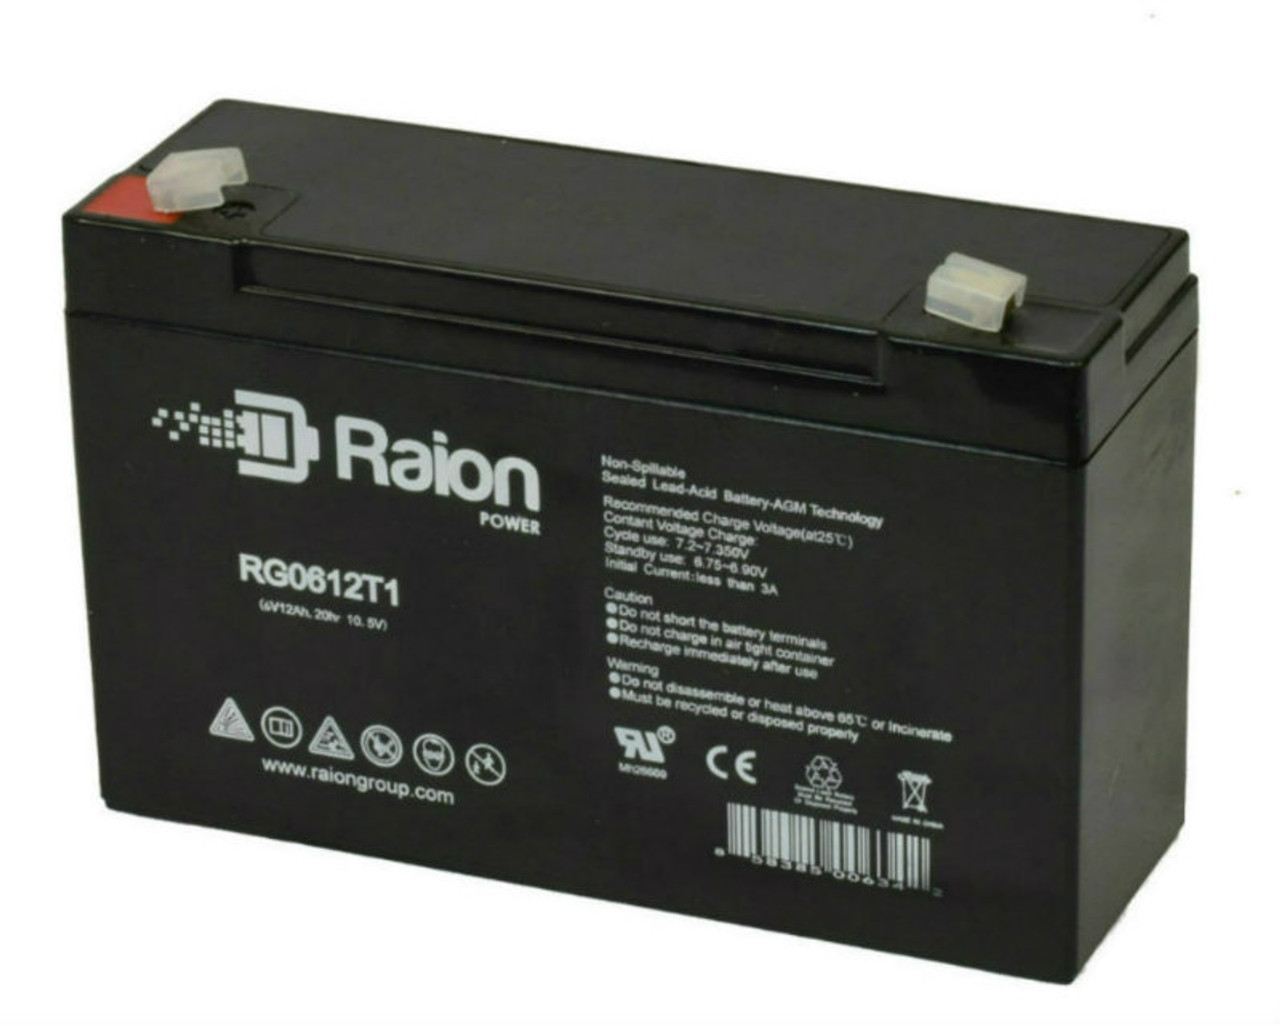 Raion Power RG06120T1 Replacement Emergency Light Battery for Dual Lite 12-825